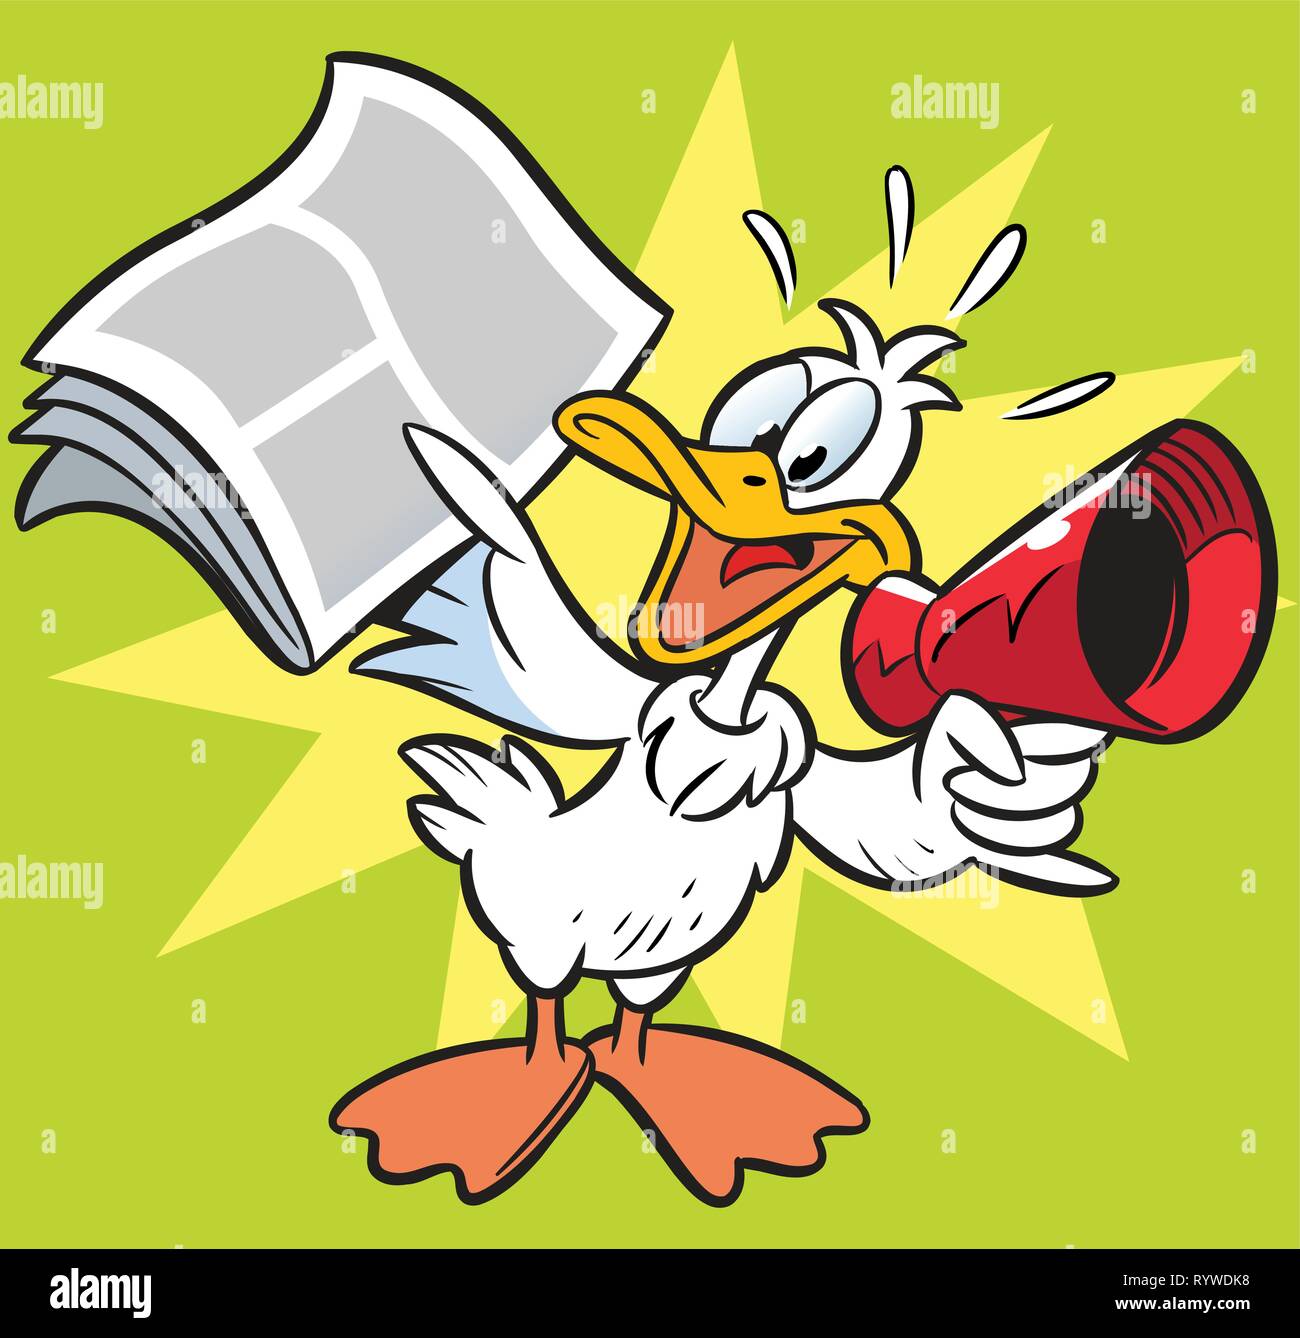 The illustration shows the goose, who shouts the news in the newspaper megaphone. Stock Vector